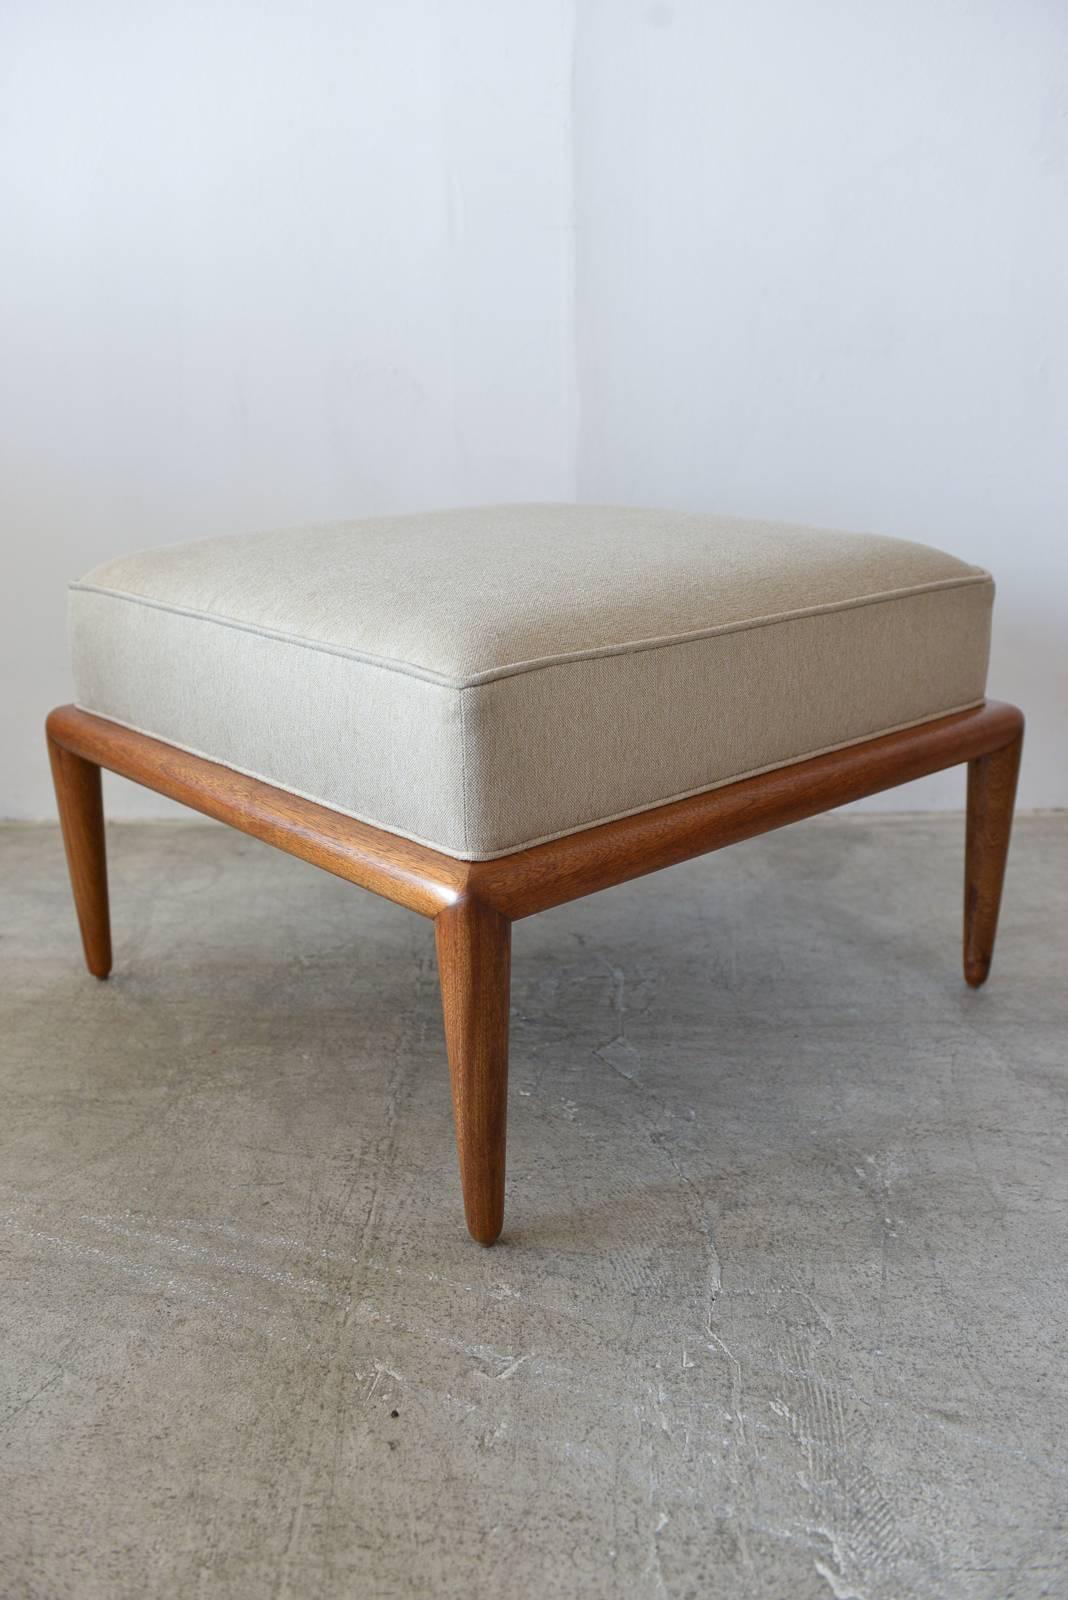 Classic ottoman by T.H. Robsjohn-Gibbings for Widdicomb. Beautifully restored wood and new beige upholstery and foam. Matching lounge chairs available in separate listing.

Measures 26